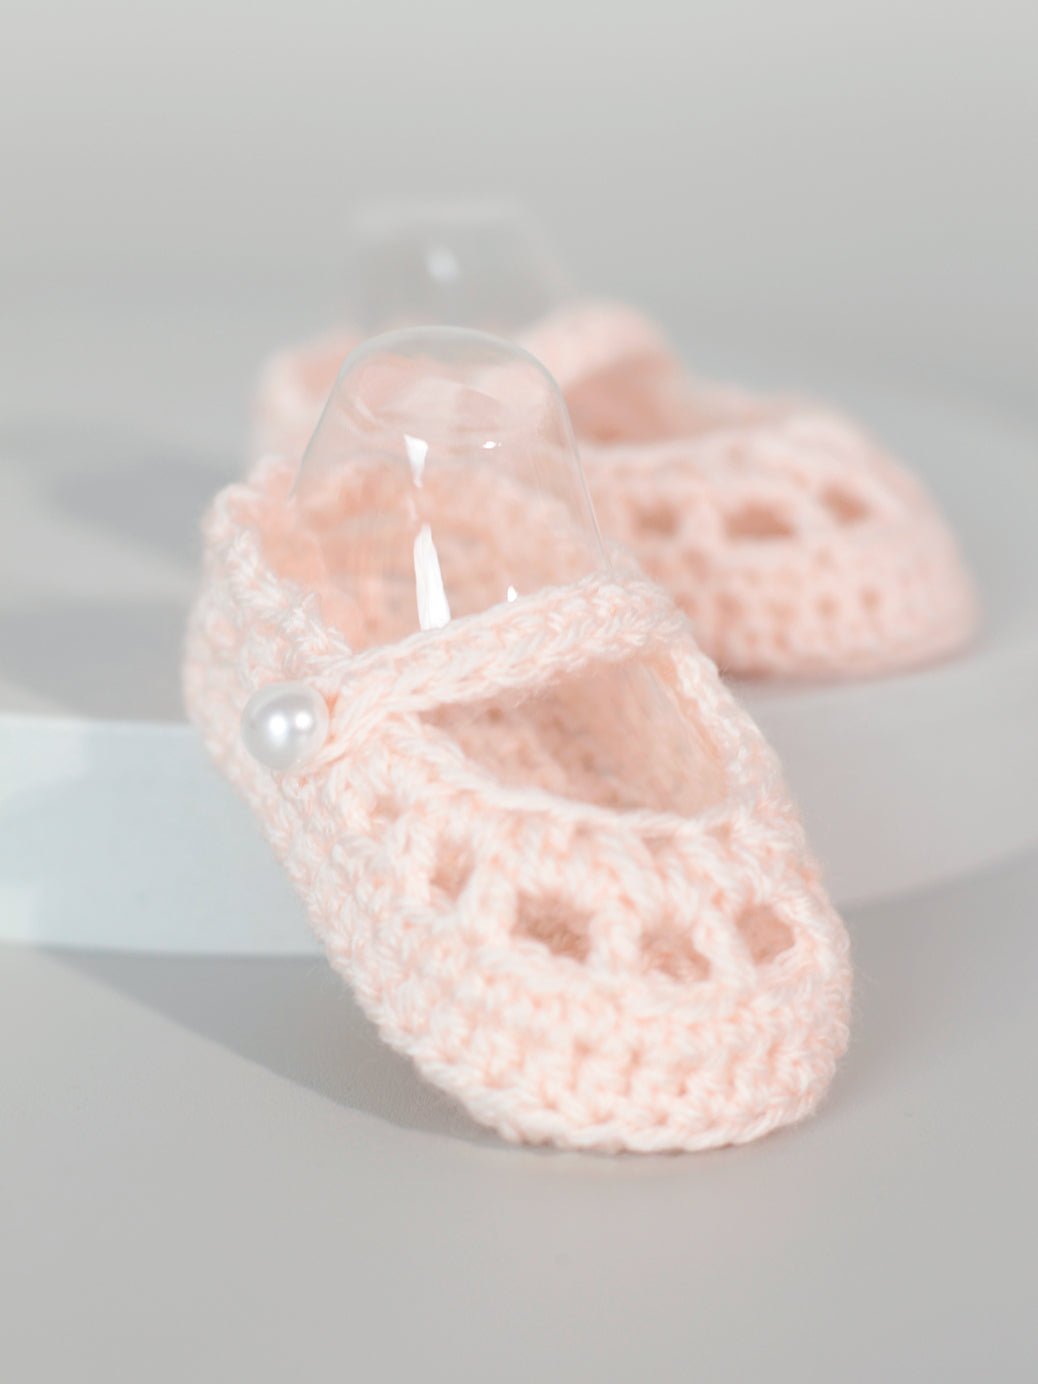 Strap Crochet Shoes in Baby Pink